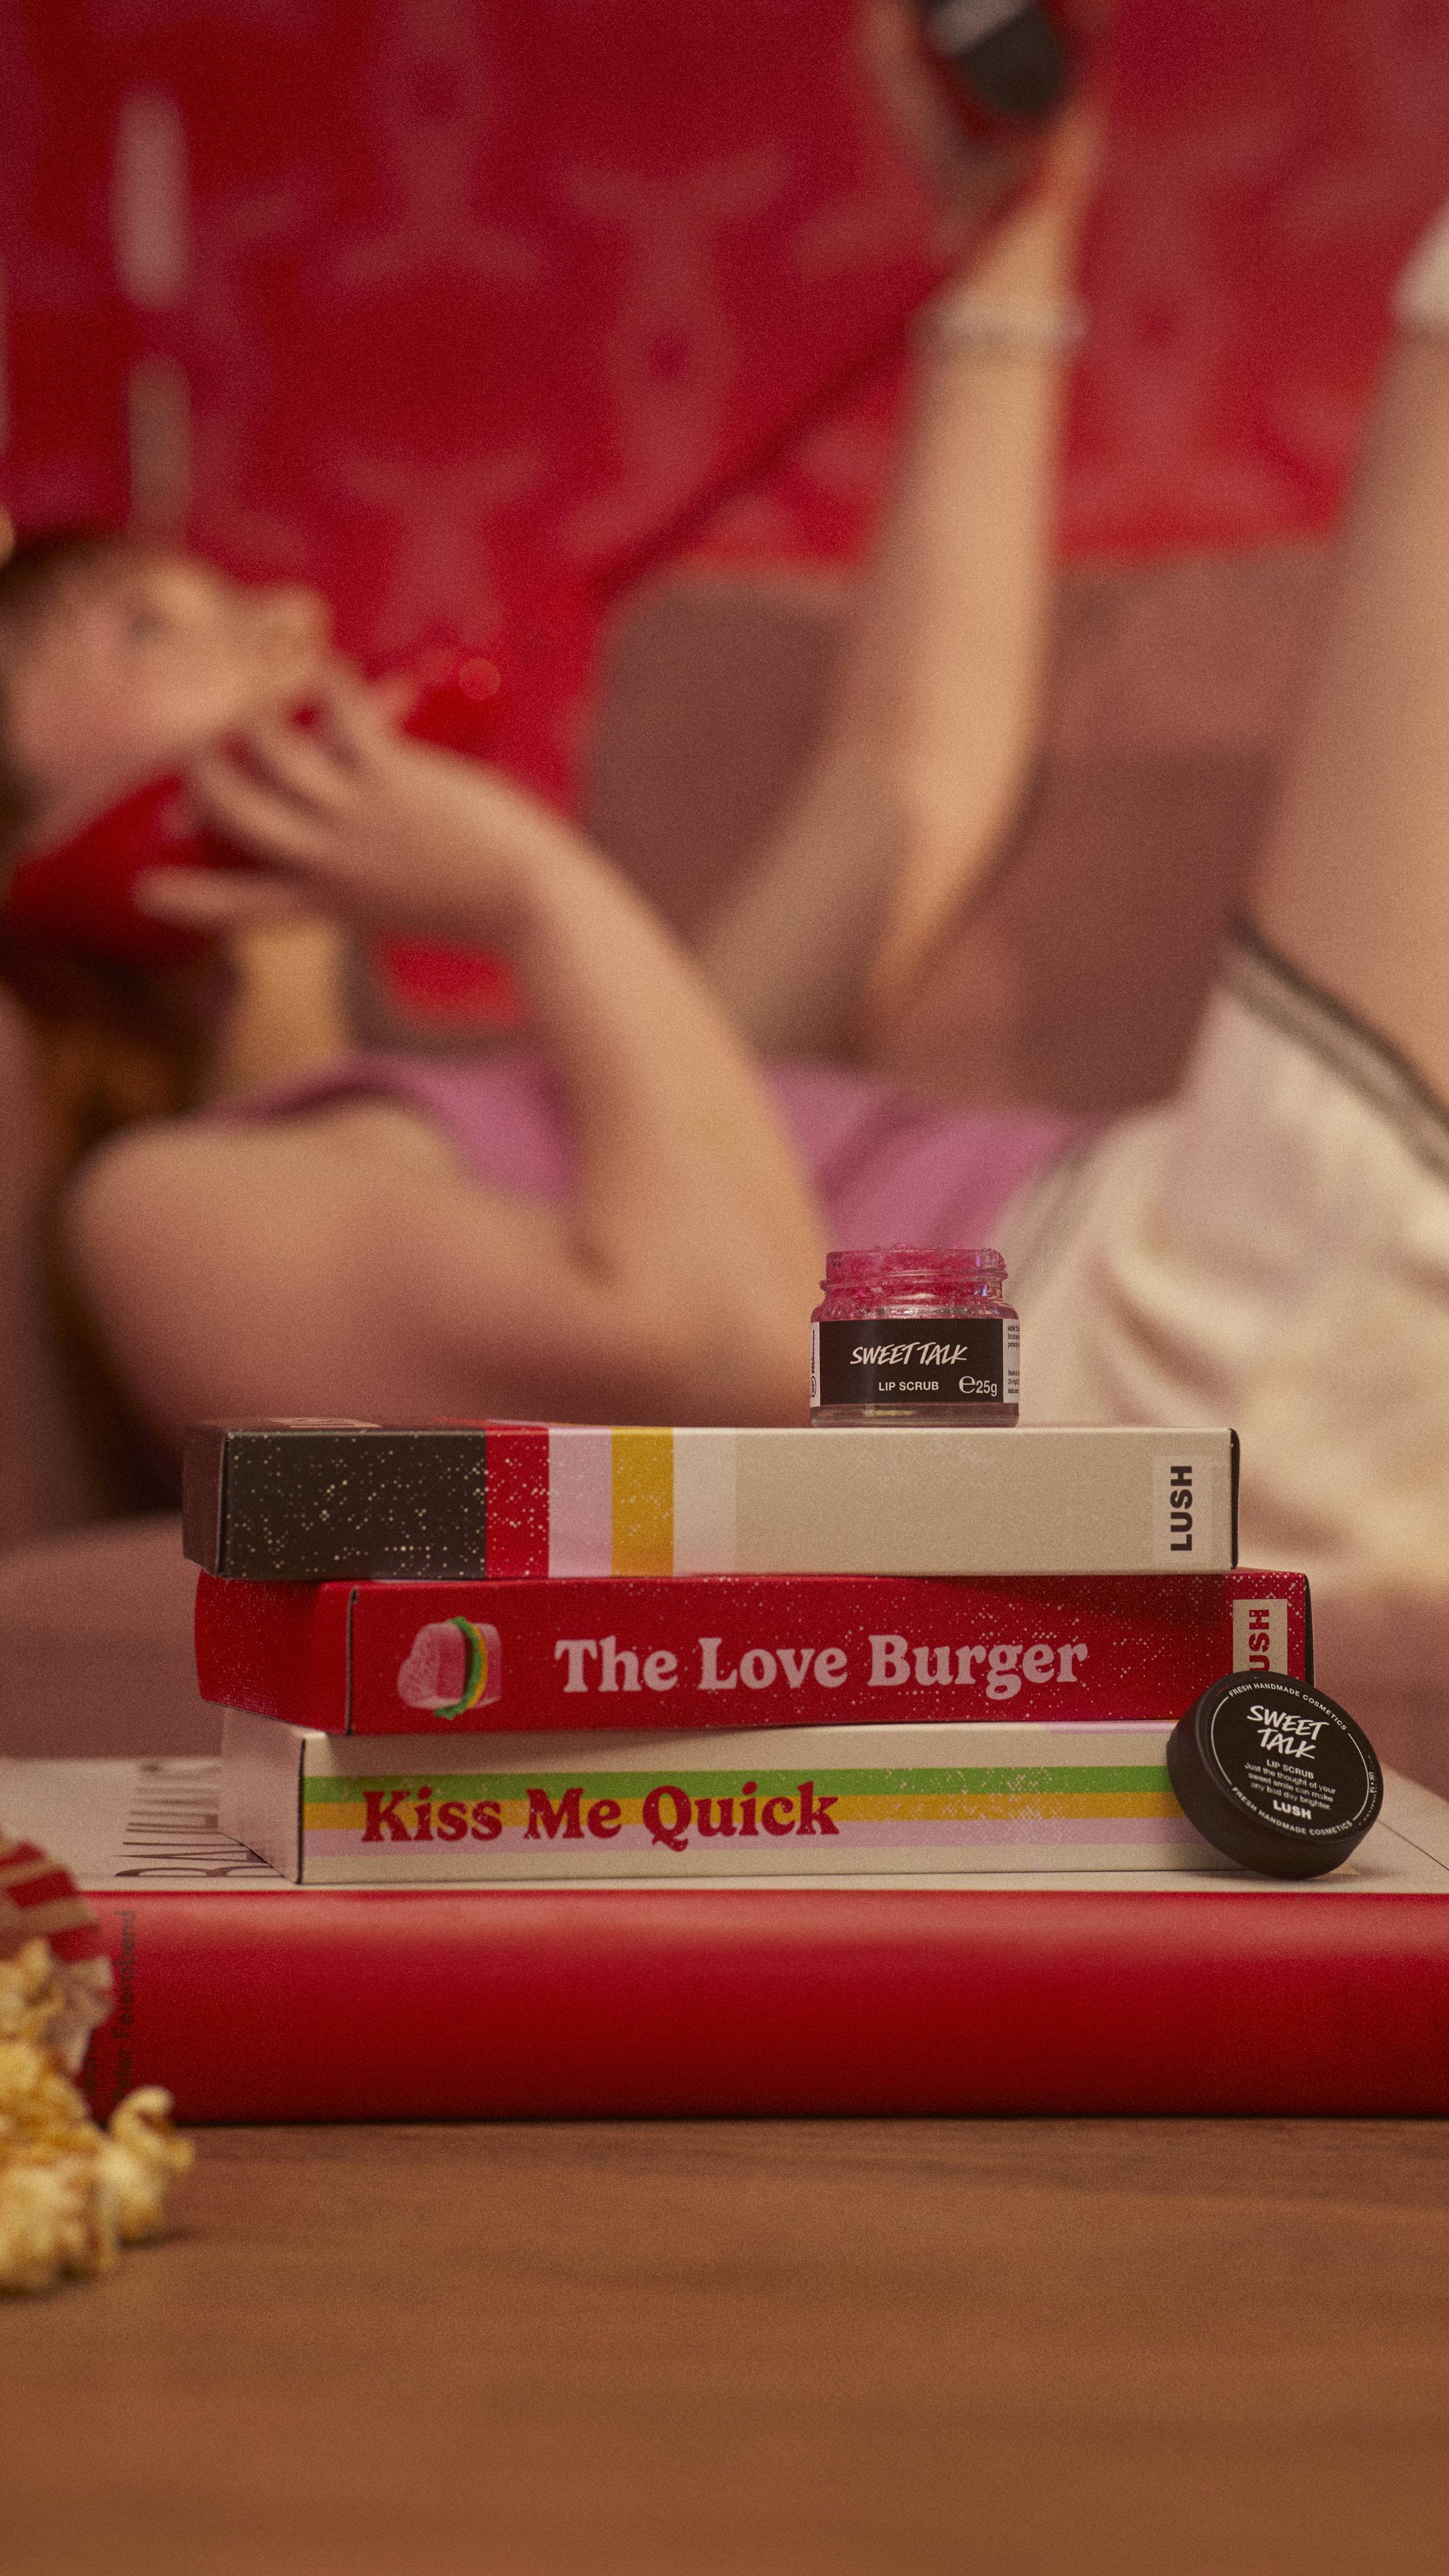 The Sweet Talk lip scrub pot is on a stack of VHS tape boxes as the model is in the background with a retro corded phone.